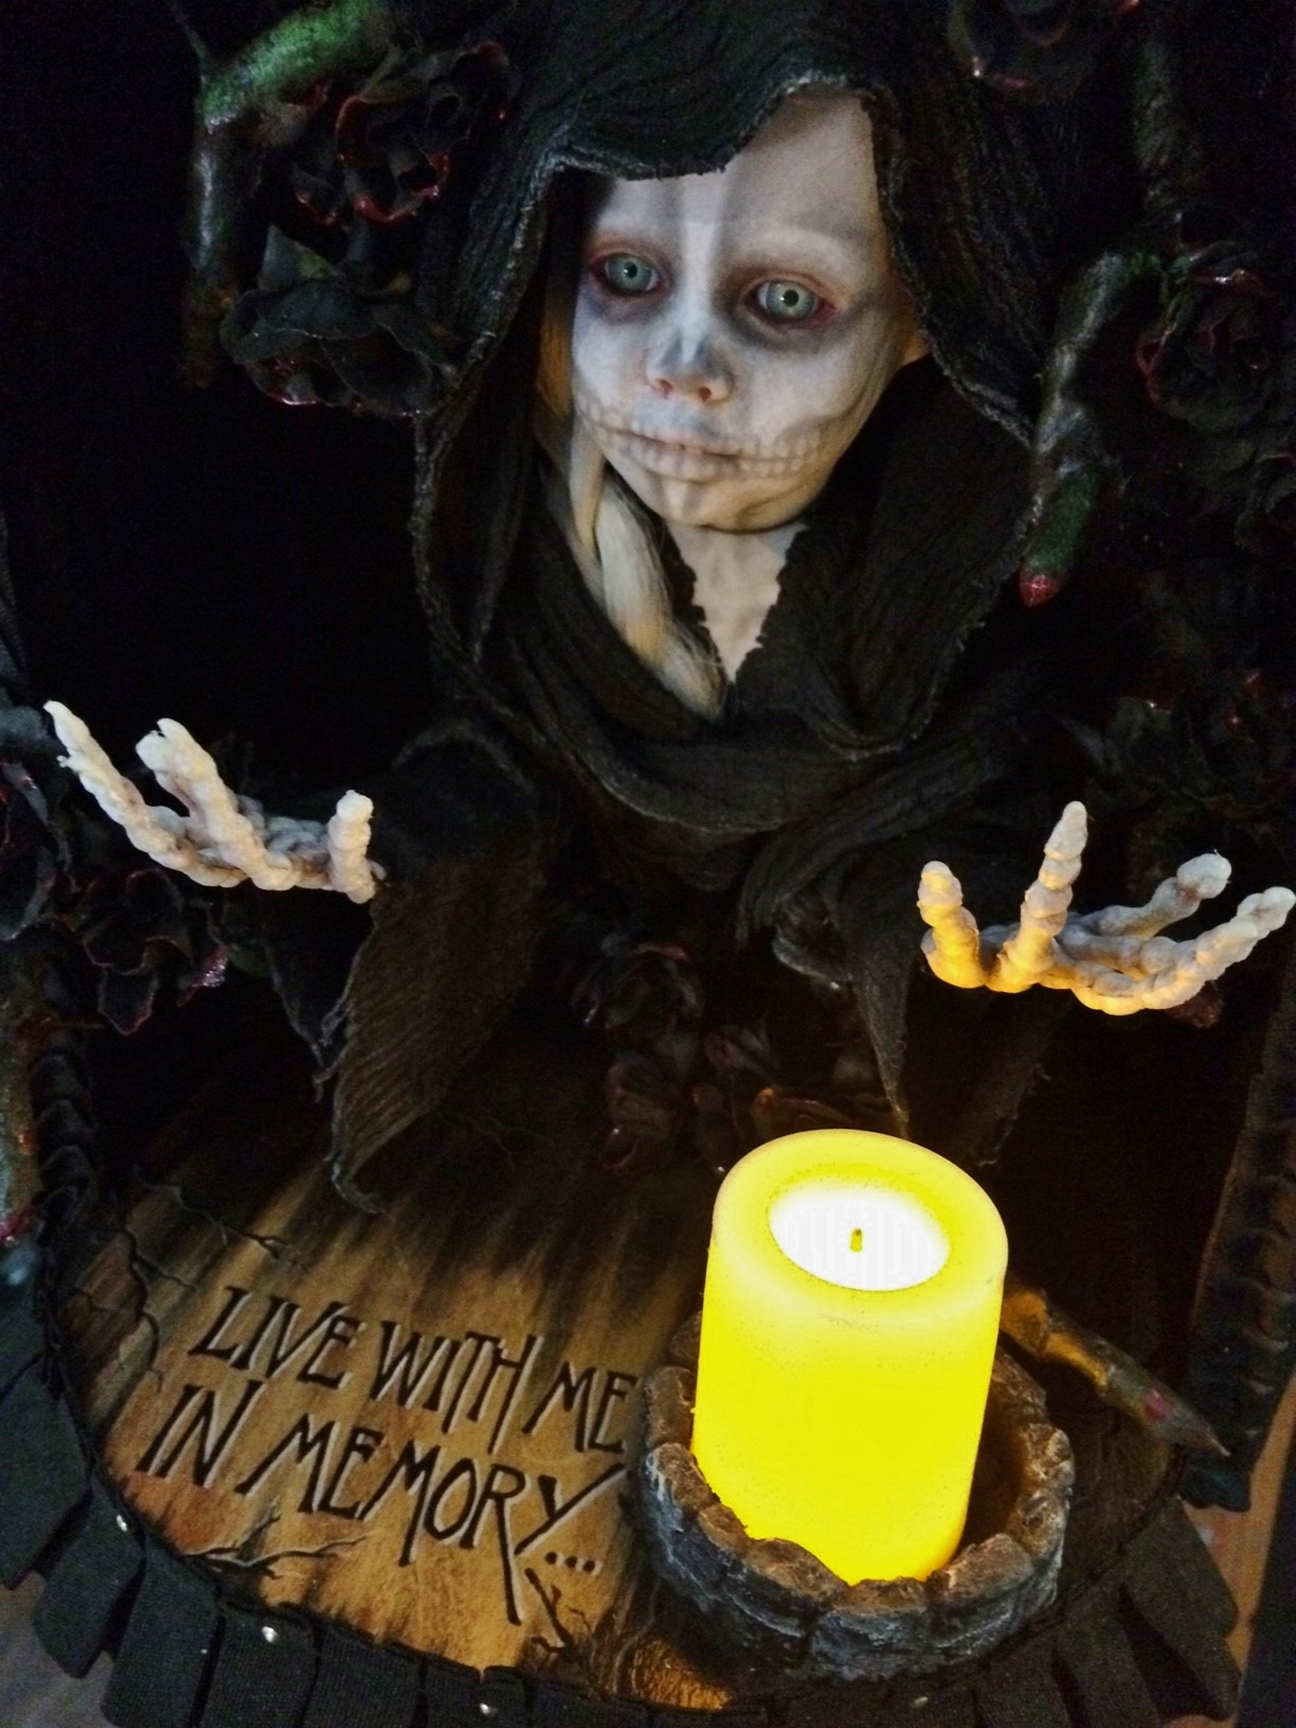 close-up mixed media altarbox and nightlight holding a saintly skeletal figure surrounded by black roses.